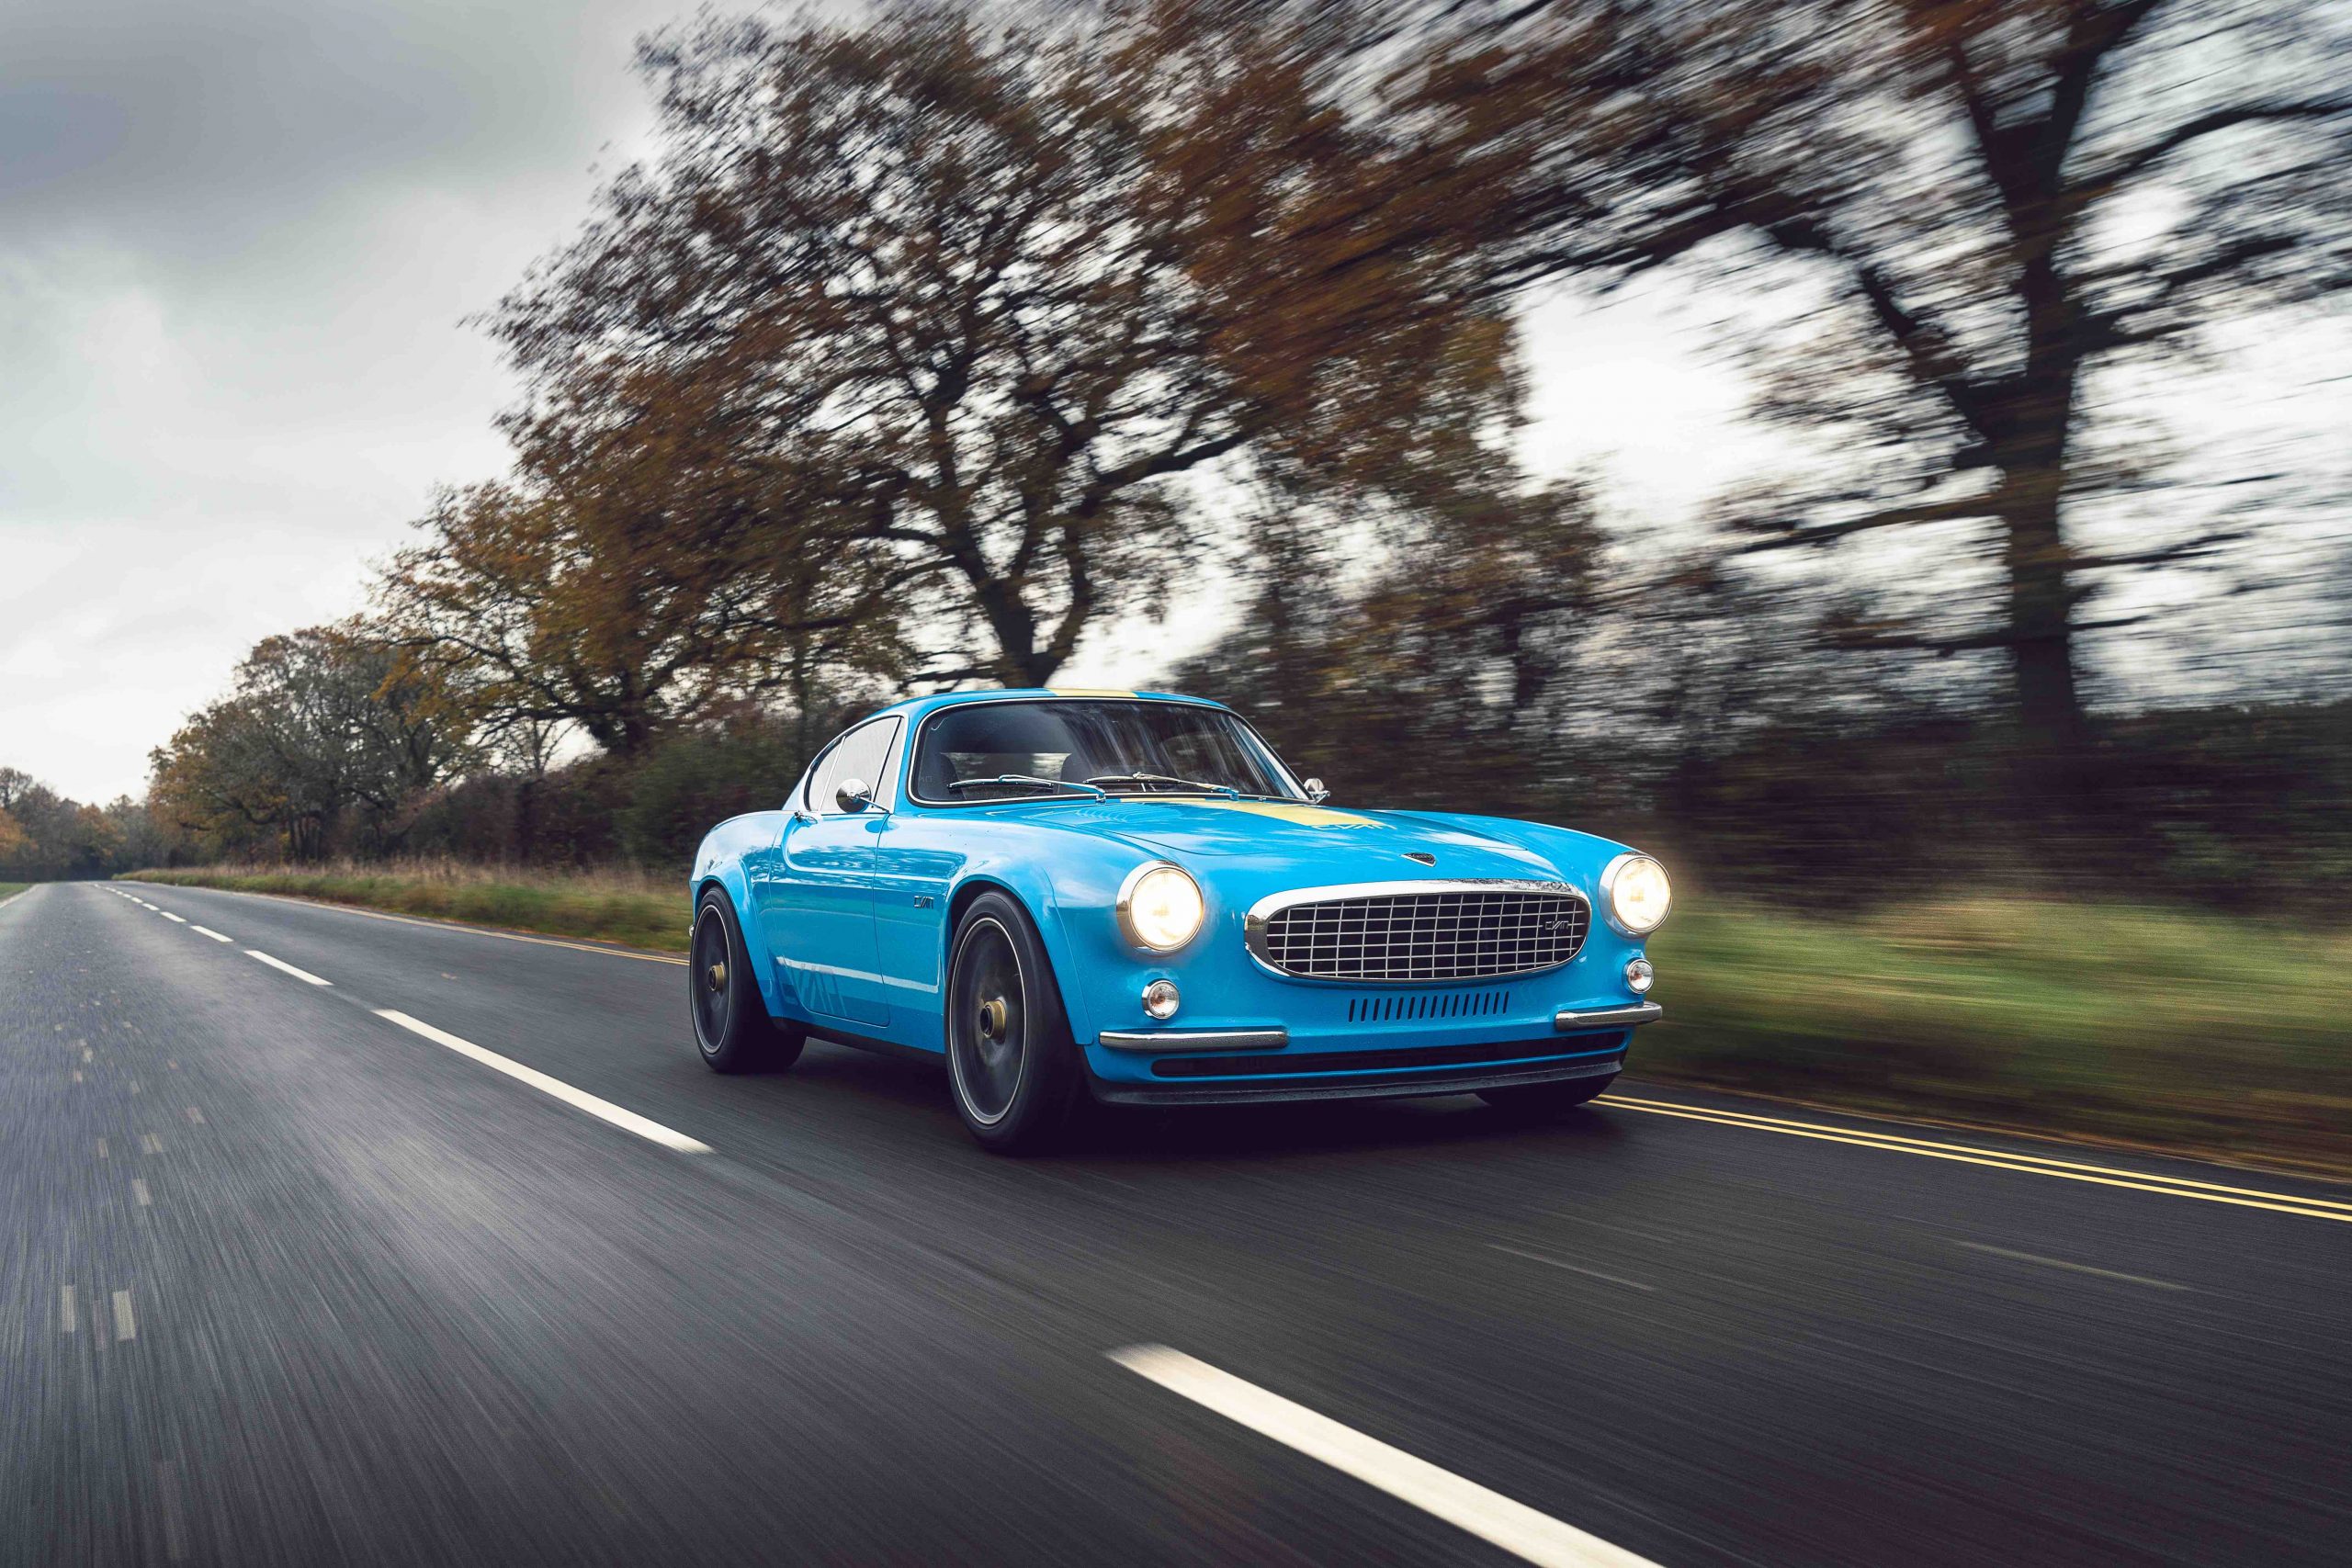 Volvo P1800 Cyan review: It doesn't get much better than this